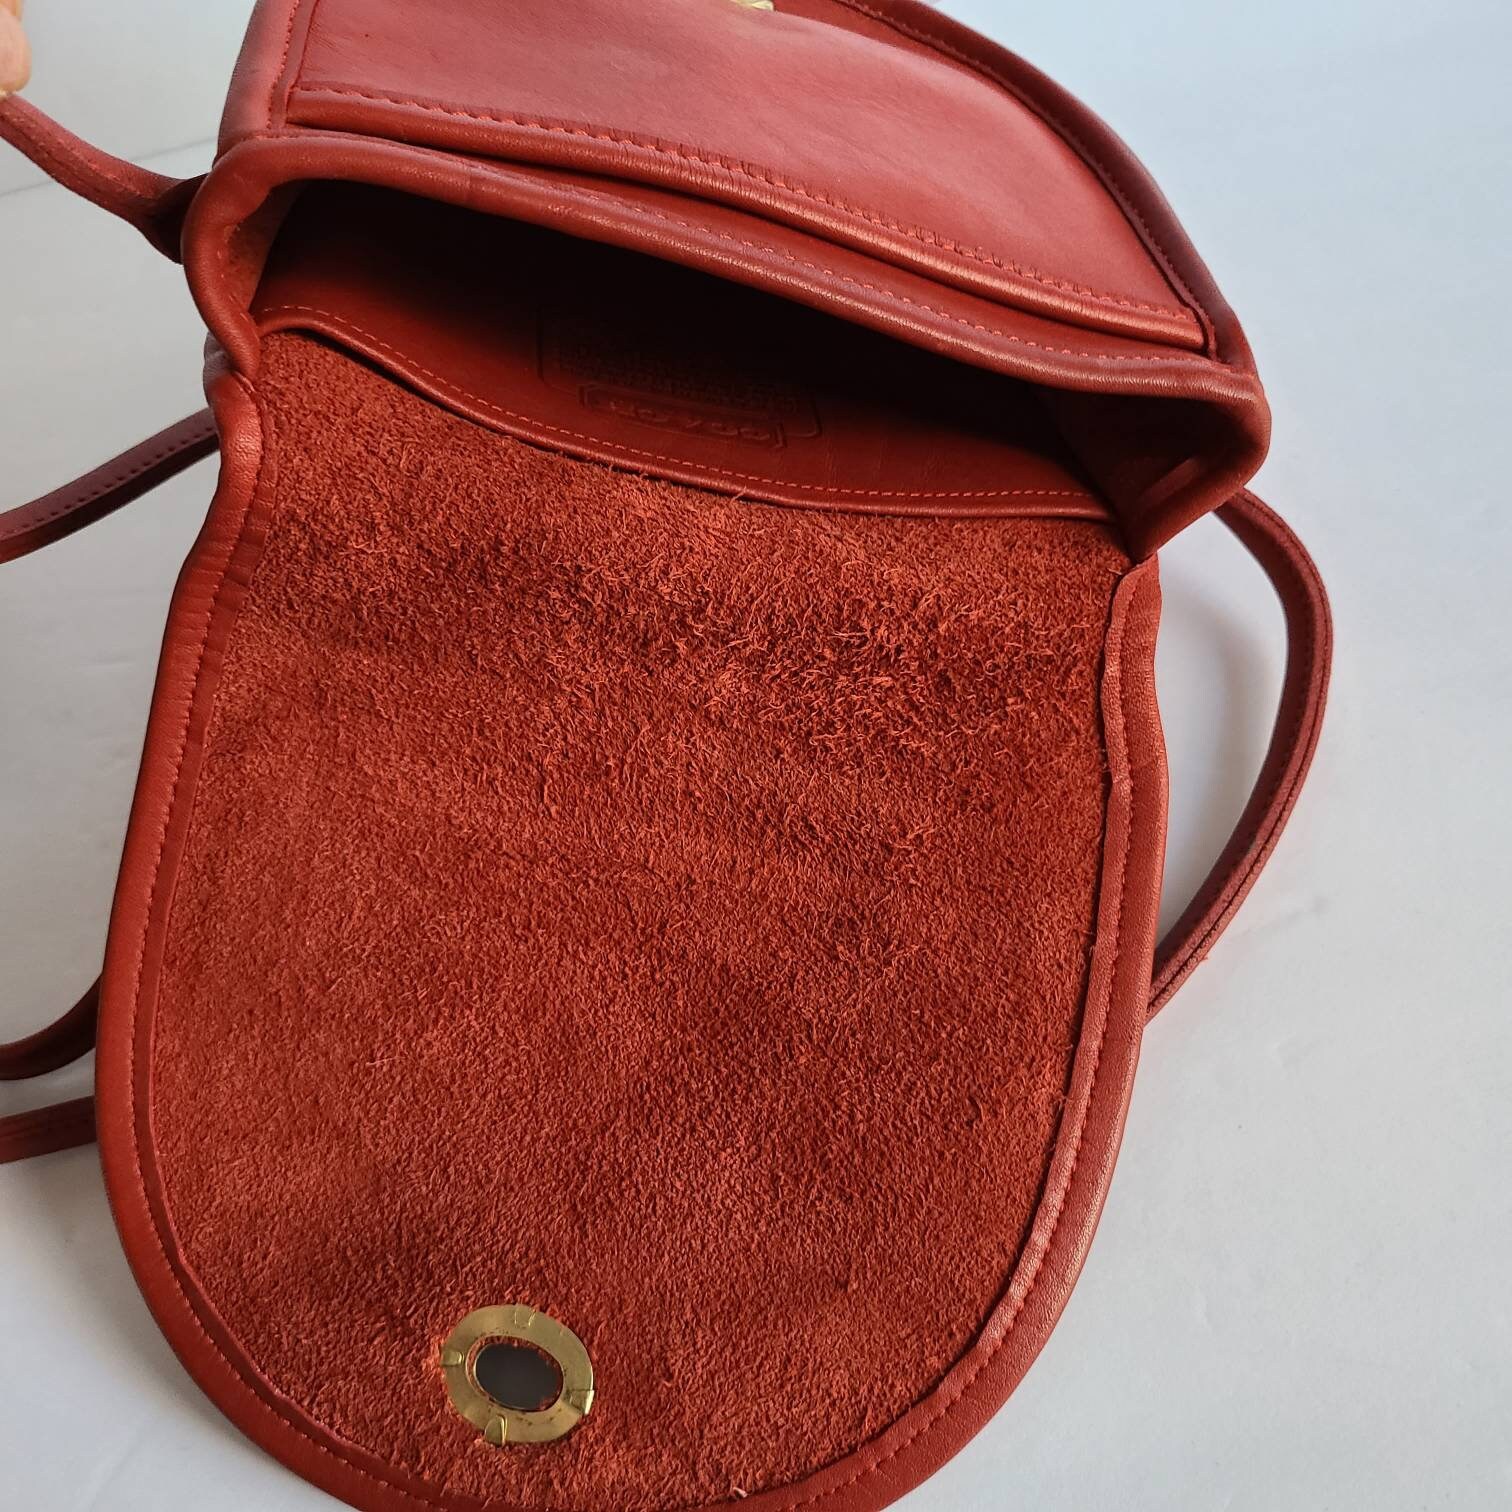 Coach Brick Red Leather Square Bag - Orlando Vintage Clothing and